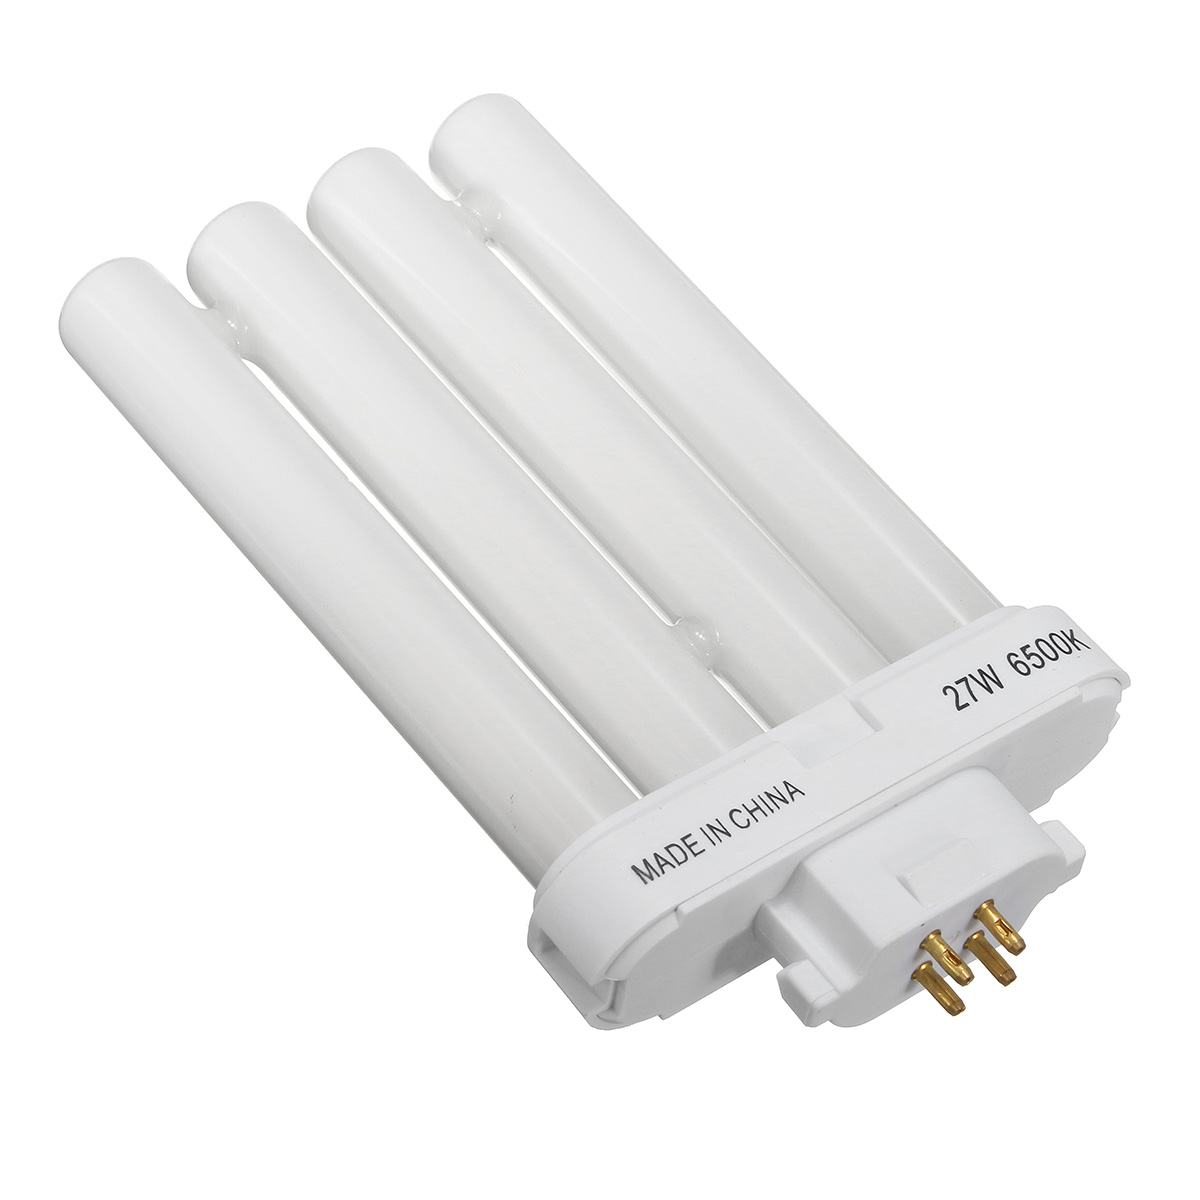 AC220V-27W-Quad-Tube-Compact-Pure-White-Fluorescent-Light-Bulb-for-Indoor-Home-Decoration-1513838